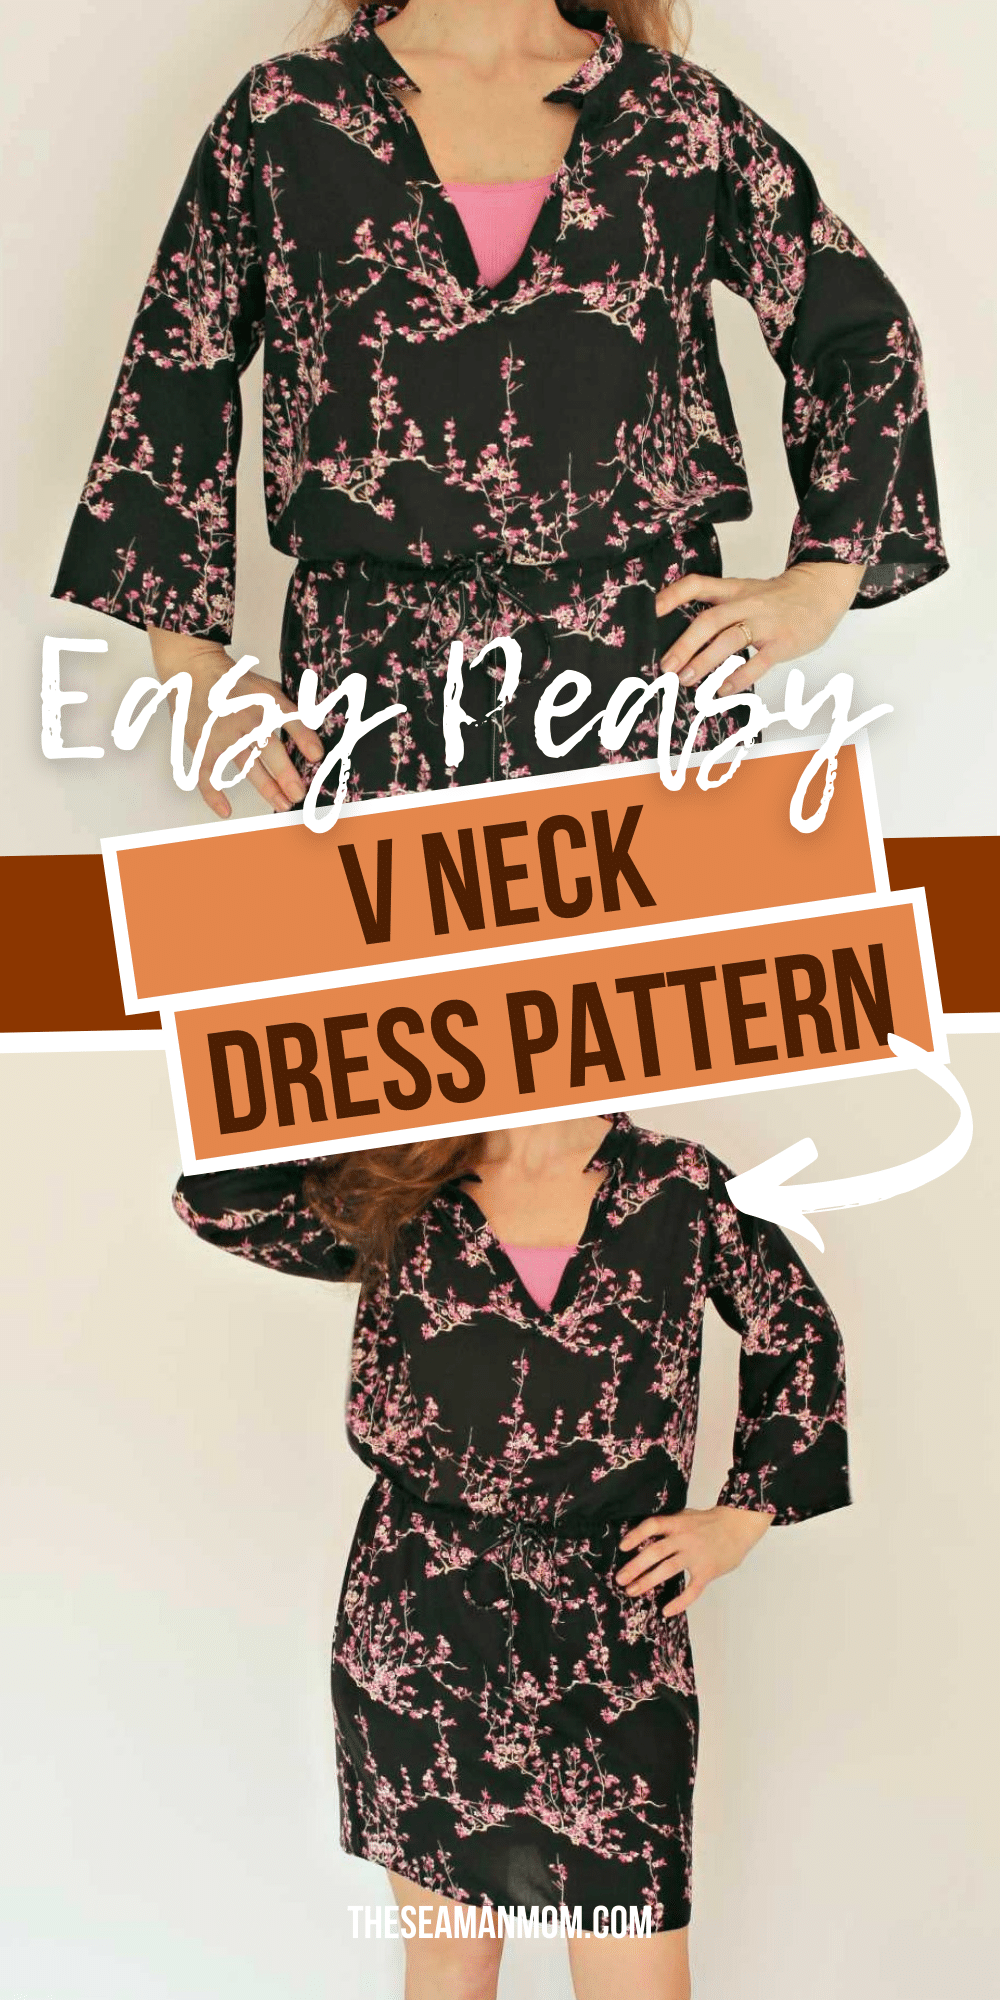 Take the plunge and make yourself a cute and  comfy dress with this v neck dress pattern! Simple and easy to make, this adorable neck floral dress is great for spring and summer as it’s made with lightweight fabric!

 via @petroneagu